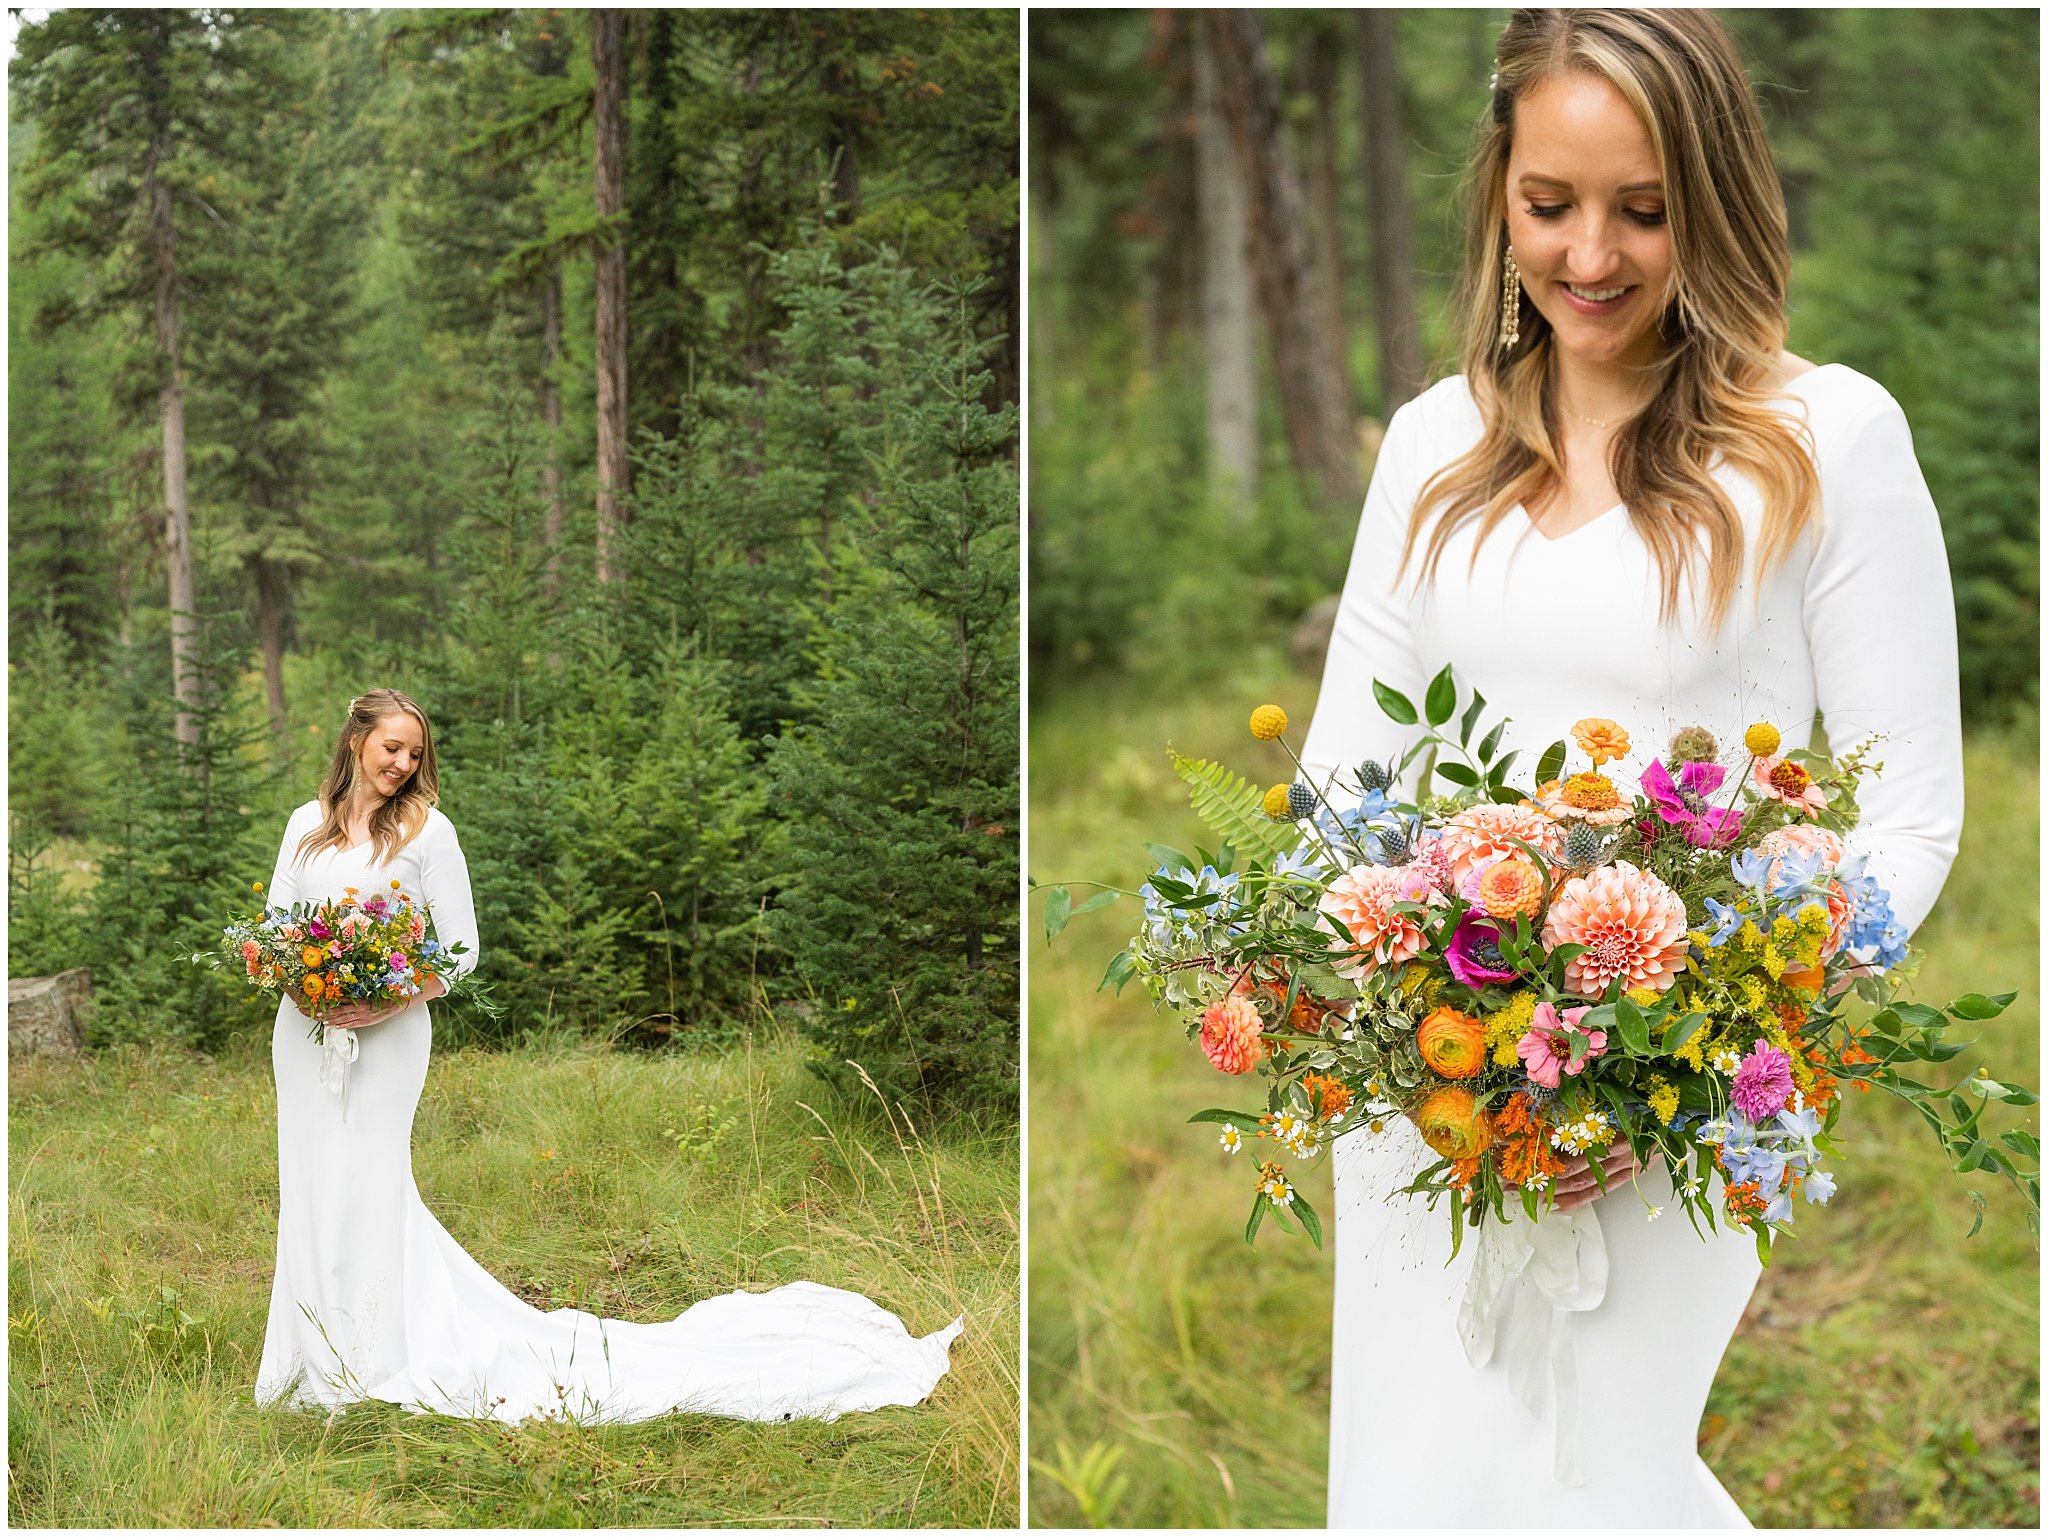 Bride in elegant fitted dress portraits in the woods in Kalispell Montana | Mountainside Weddings Kalispell Montana Destination Wedding | Jessie and Dallin Photography